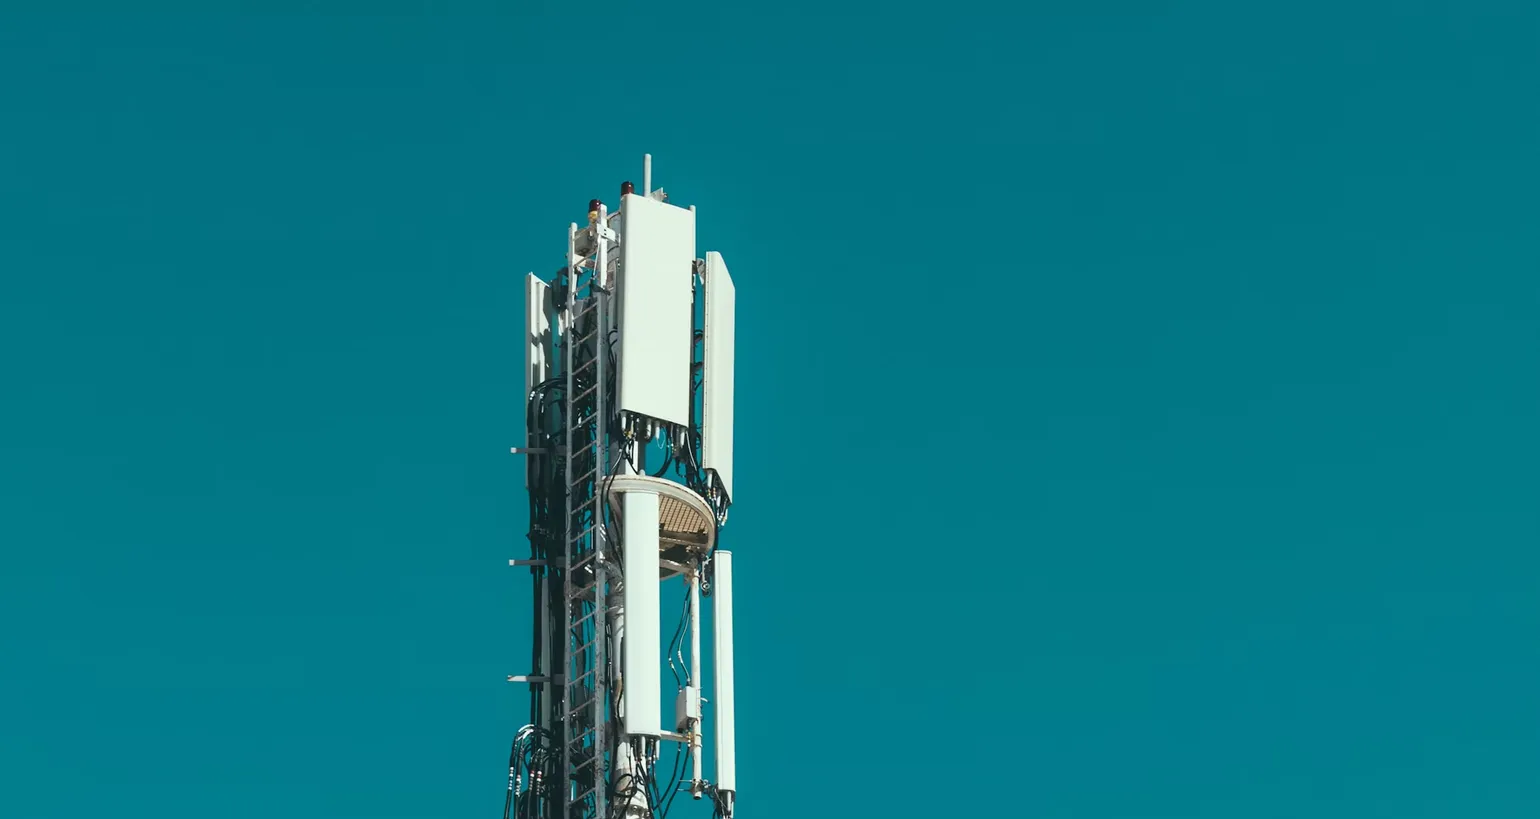 What are the disadvantages of 5G Standalone?